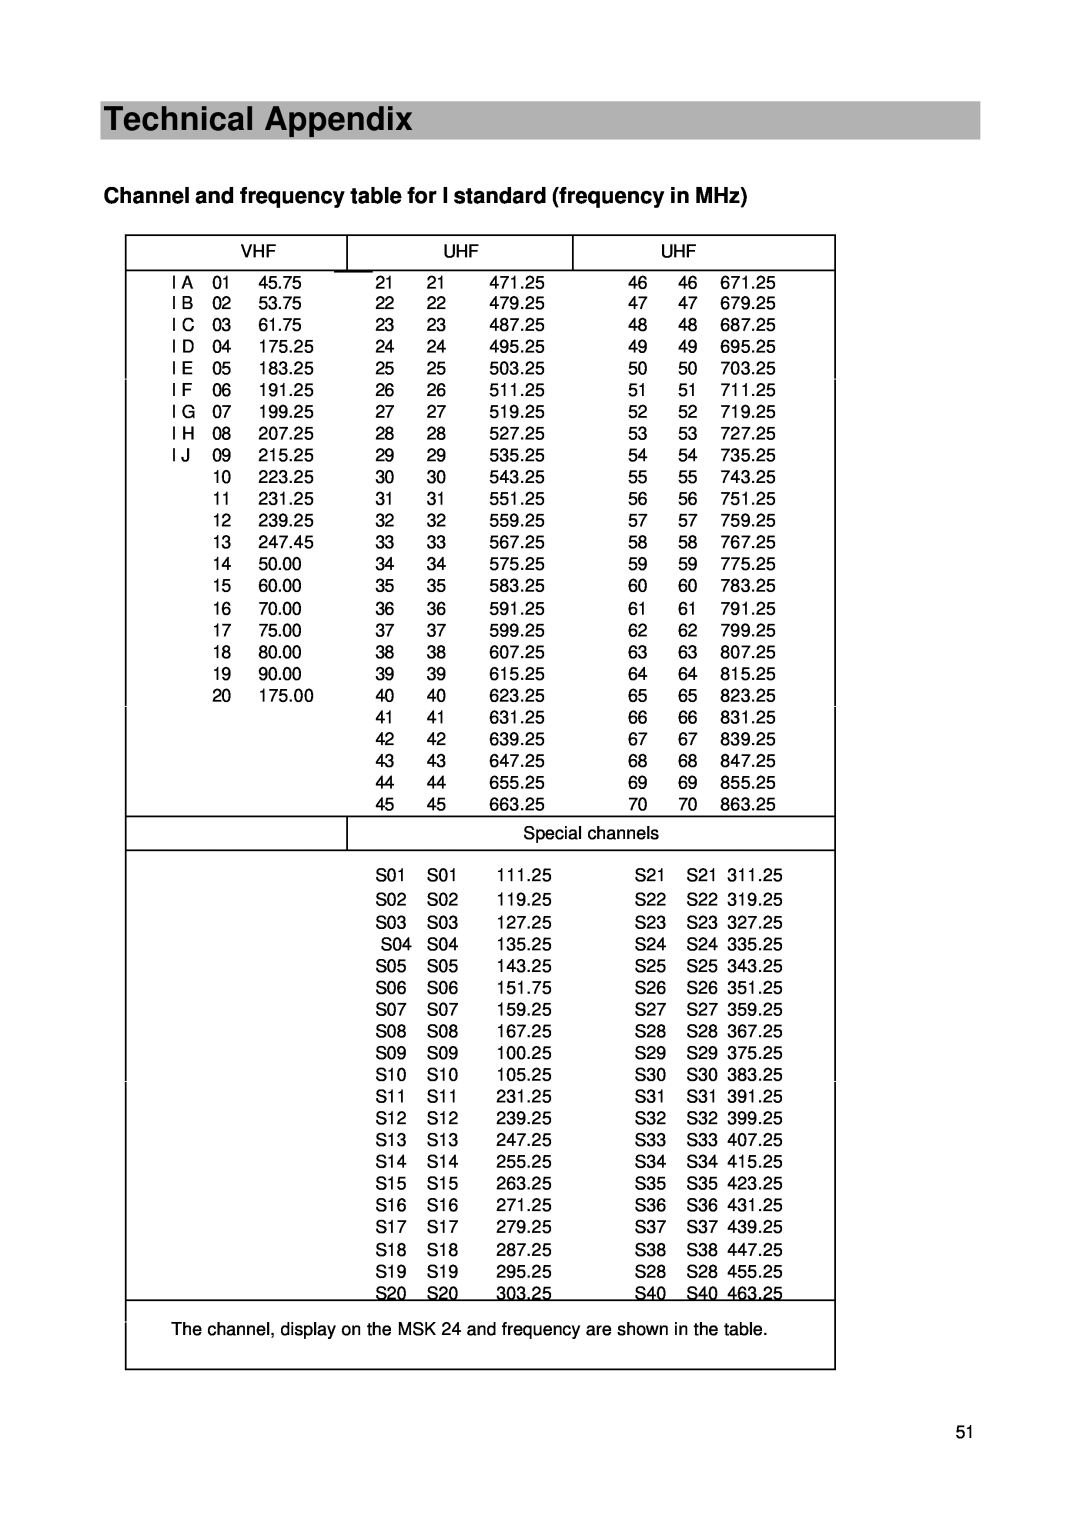 Kathrein MSK 24 manual Channel and frequency table for I standard frequency in MHz, Technical Appendix 